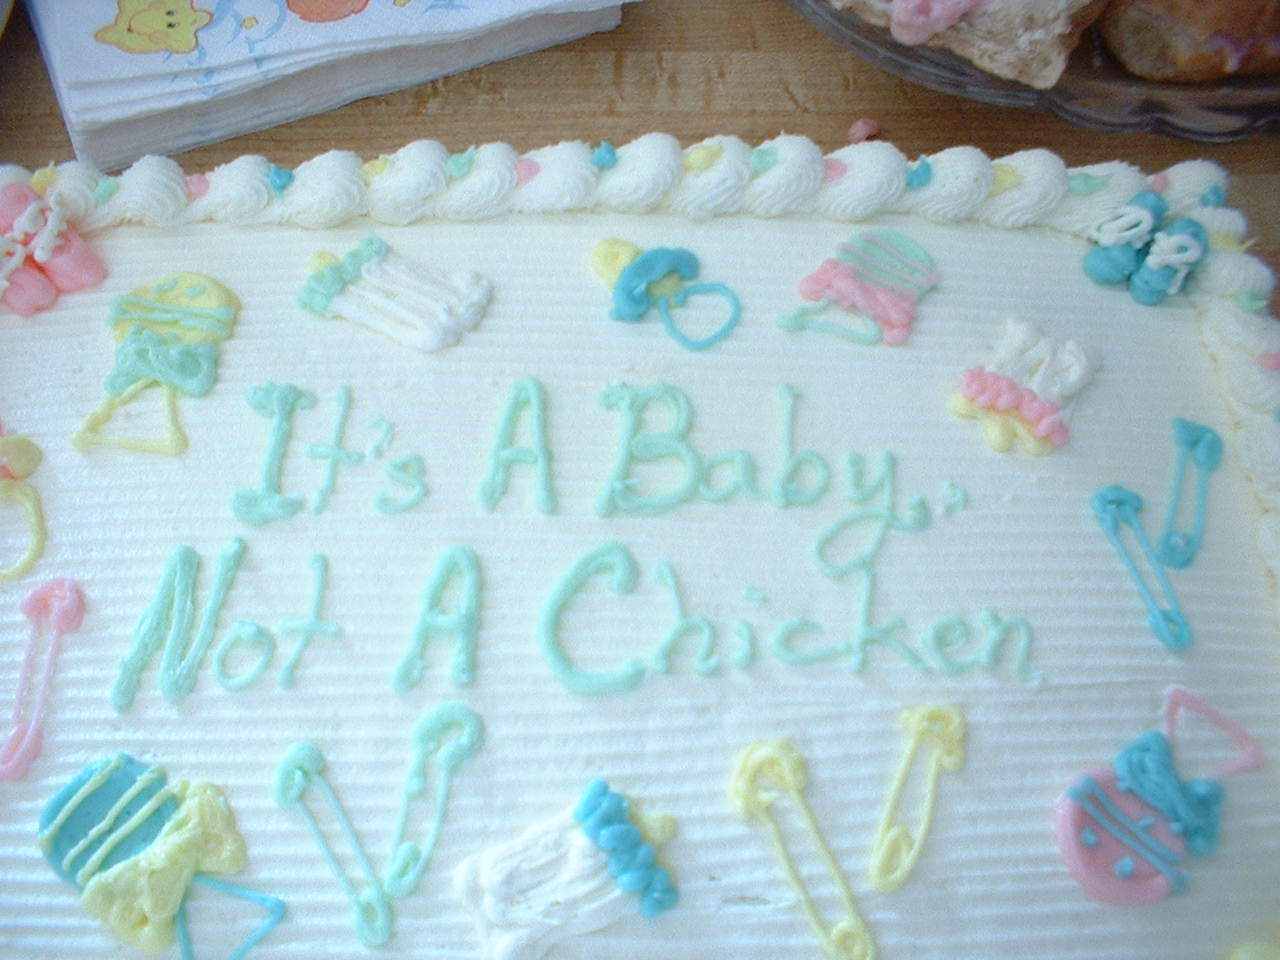 The baby was born on March 28th. The baby shower was earlier that day.